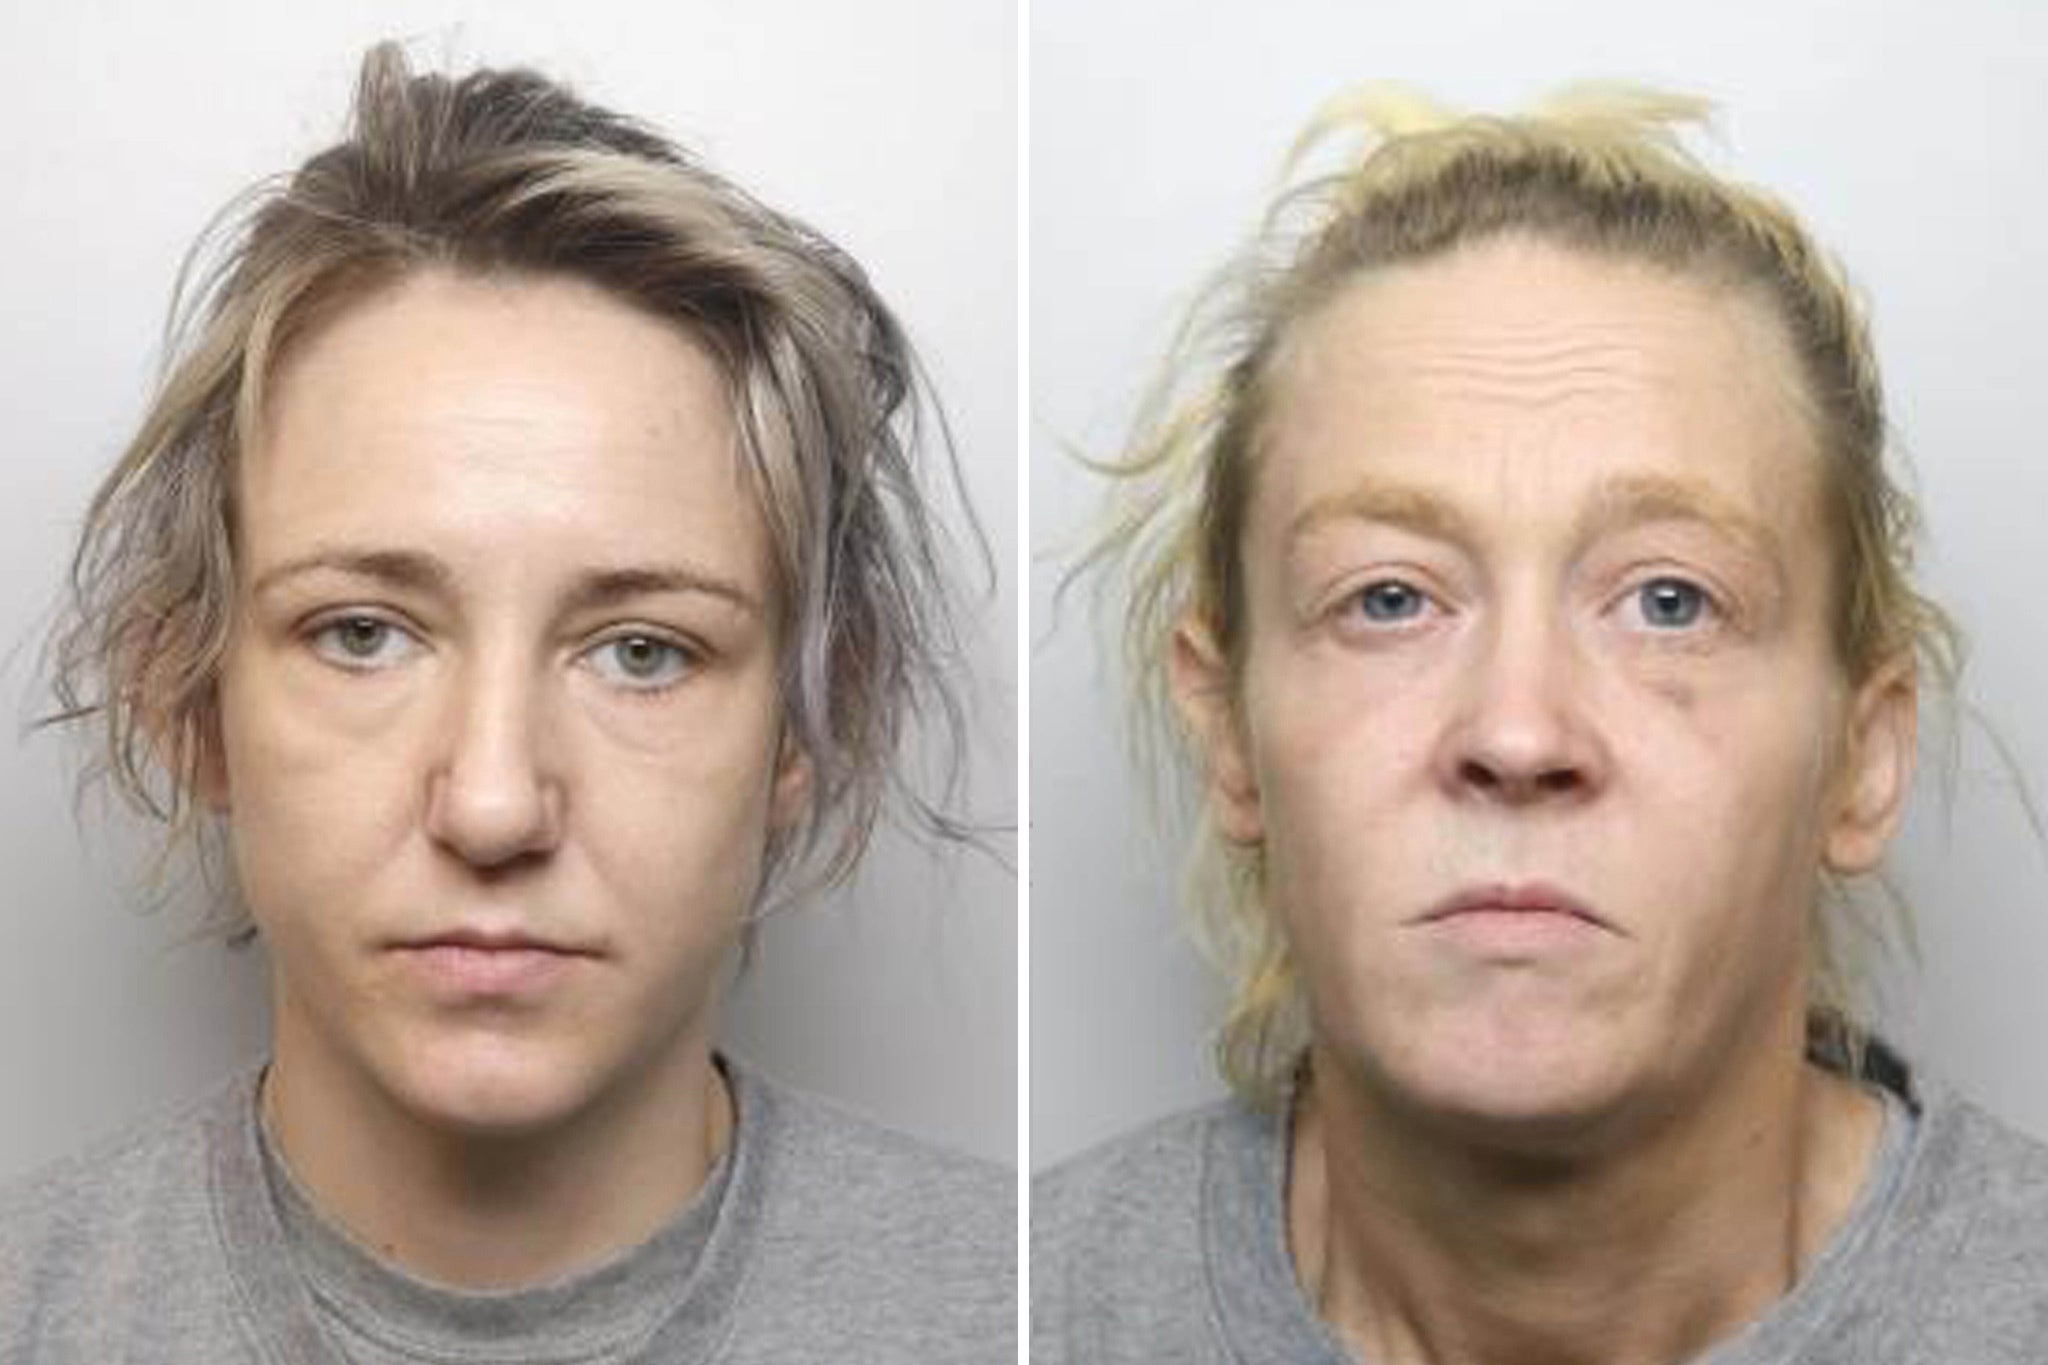 Zoe Rider, 36, and Nicola Lethbridge, 45, attacked their 60-year-old neighbour Stephen Koszyczarski in his Sheffield flat as they falsely accused him of being a paedophile.